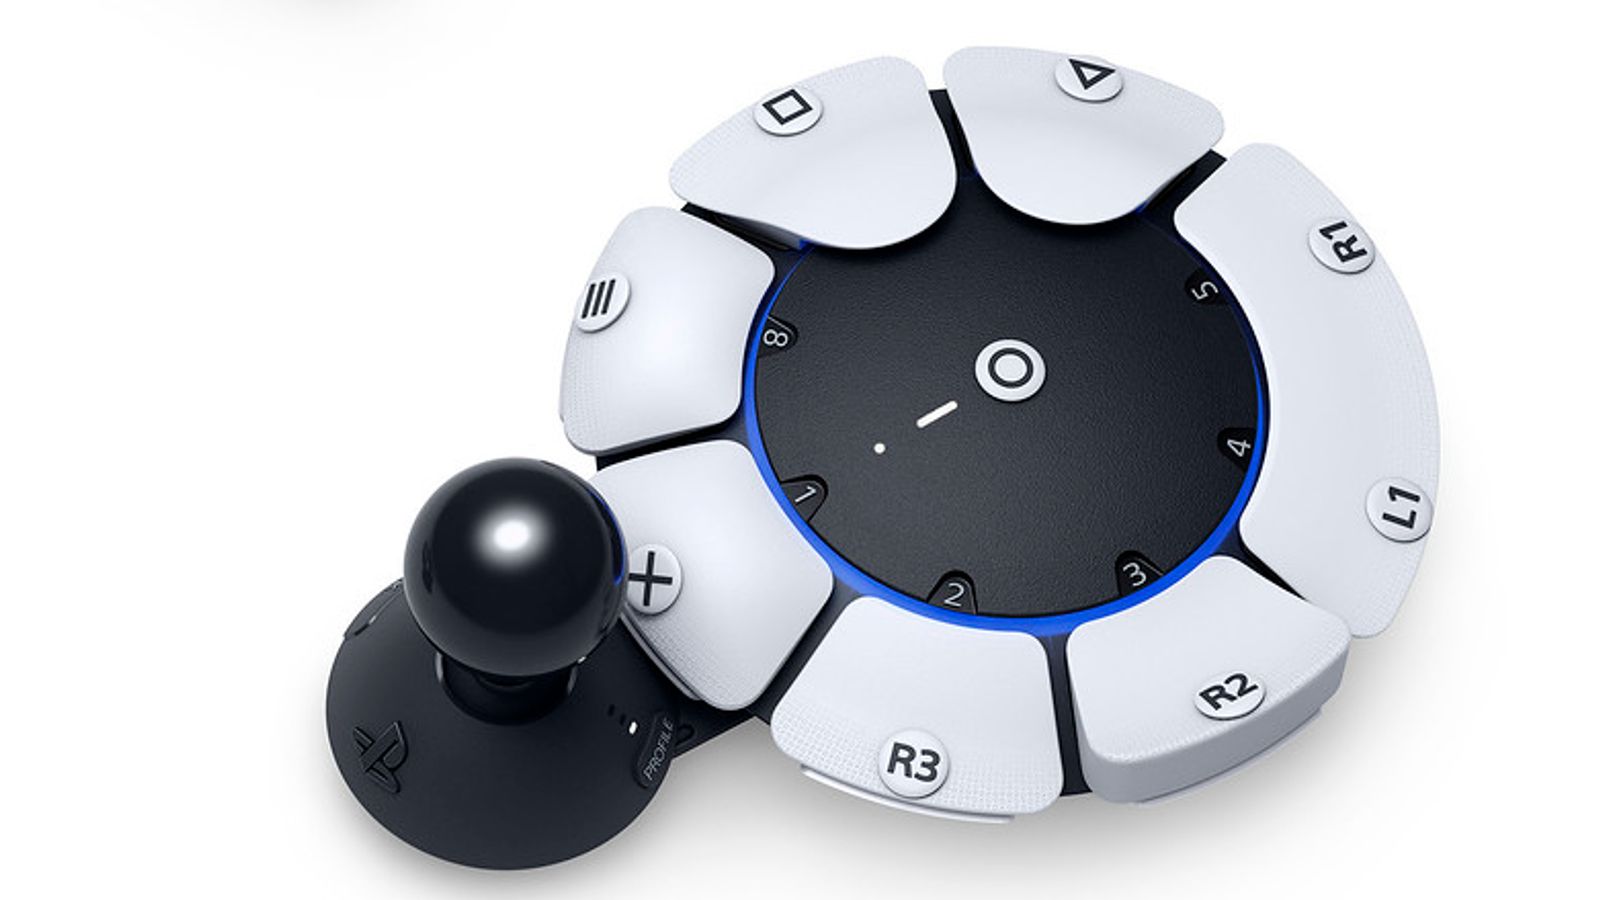 CES 2023: PlayStation accessibility controller unveiled to help